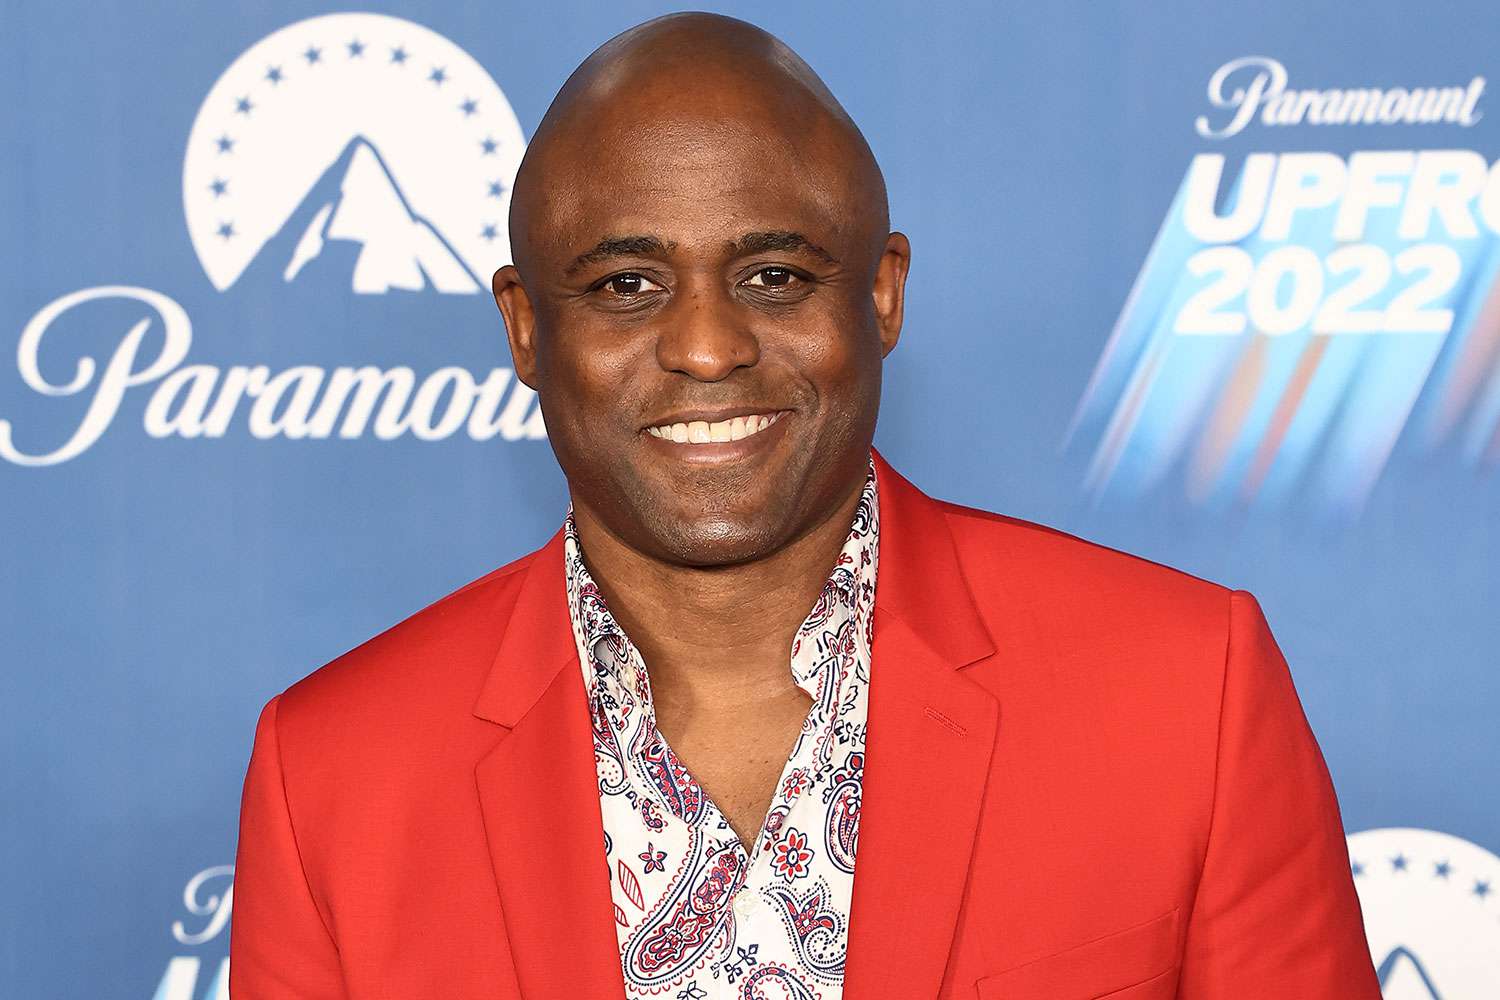 Wayne Brady Involved In Car Accident, Physical Altercation With Other Driver